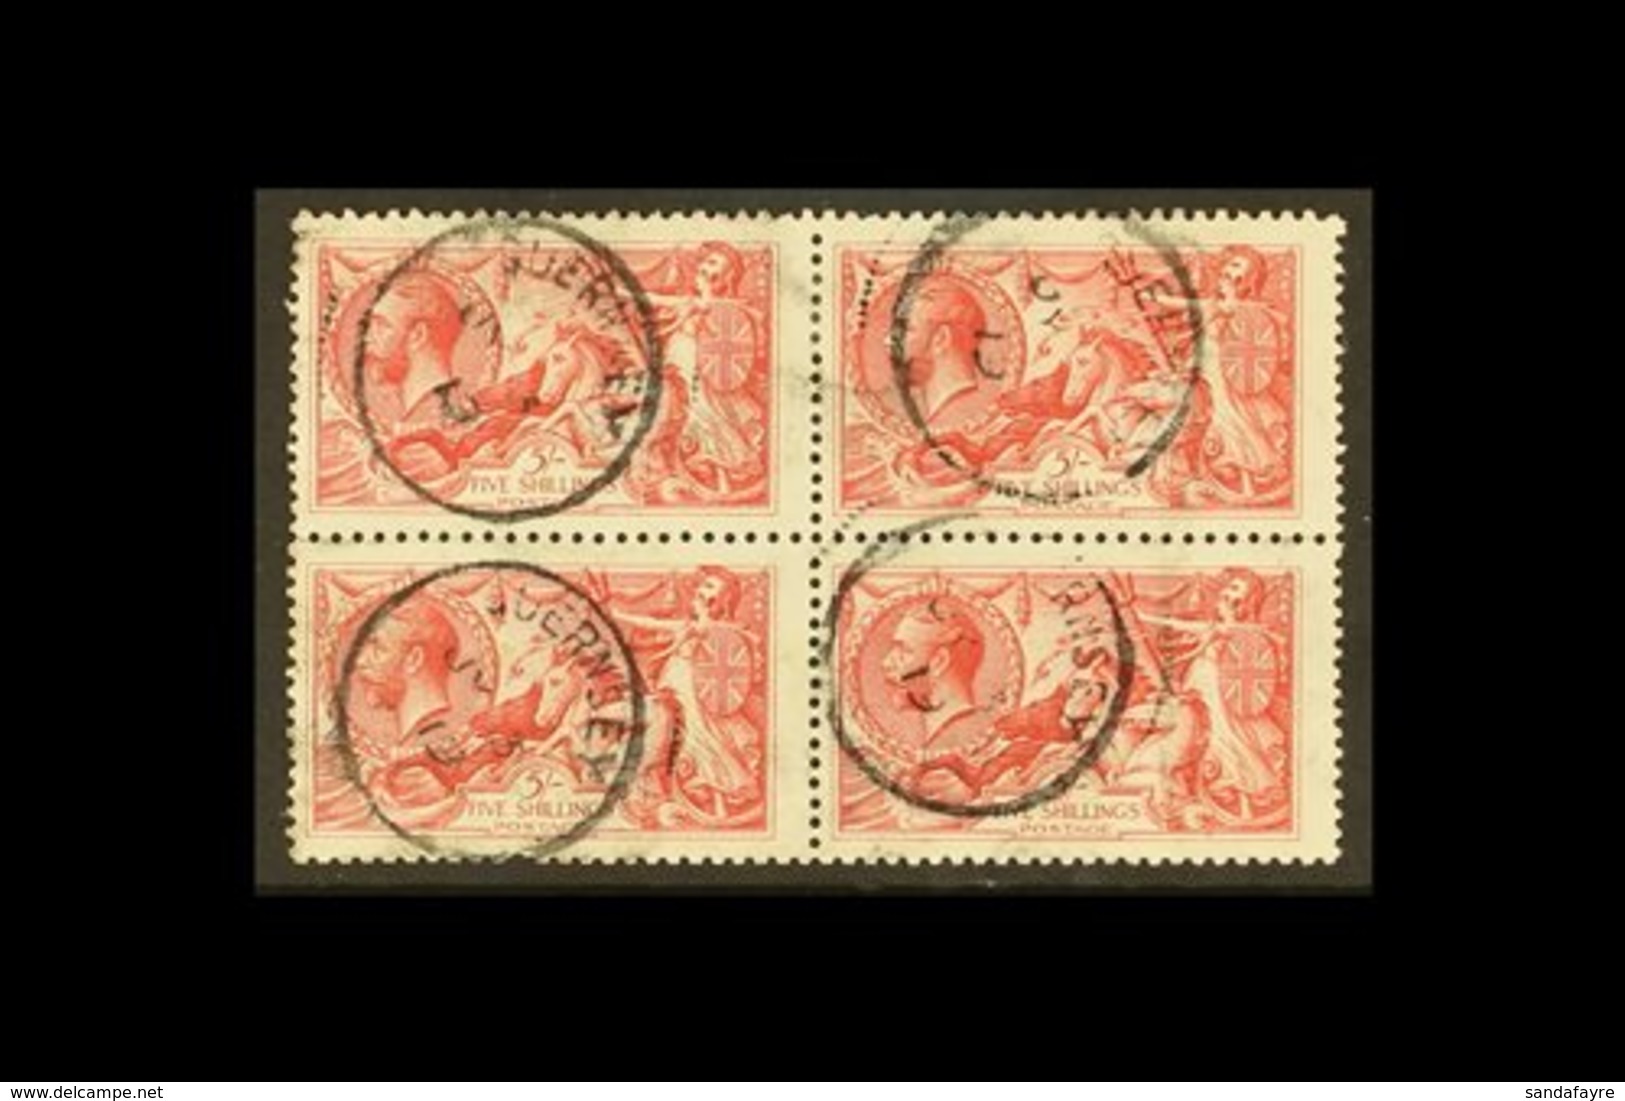 1918-19 5S SEAHORSE MULTIPLE.  5s Rose-red Seahorse, Bradbury Printing, SG 416, Good Used BLOCK OF FOUR With Guernsey, J - Unclassified